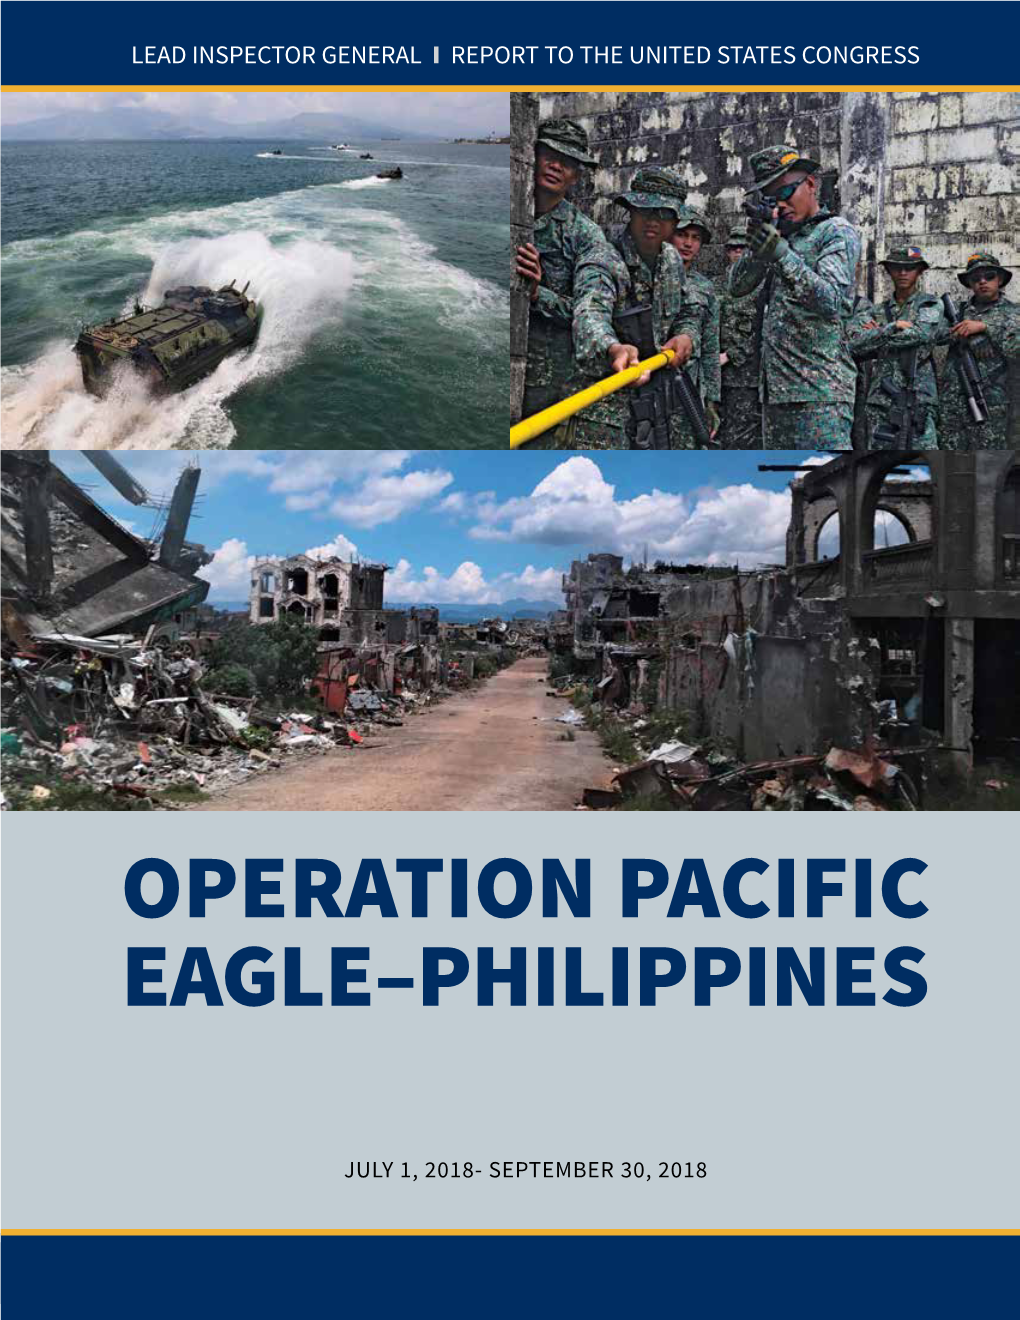 Operation Pacific Eagle-Philippines, Report to the United States